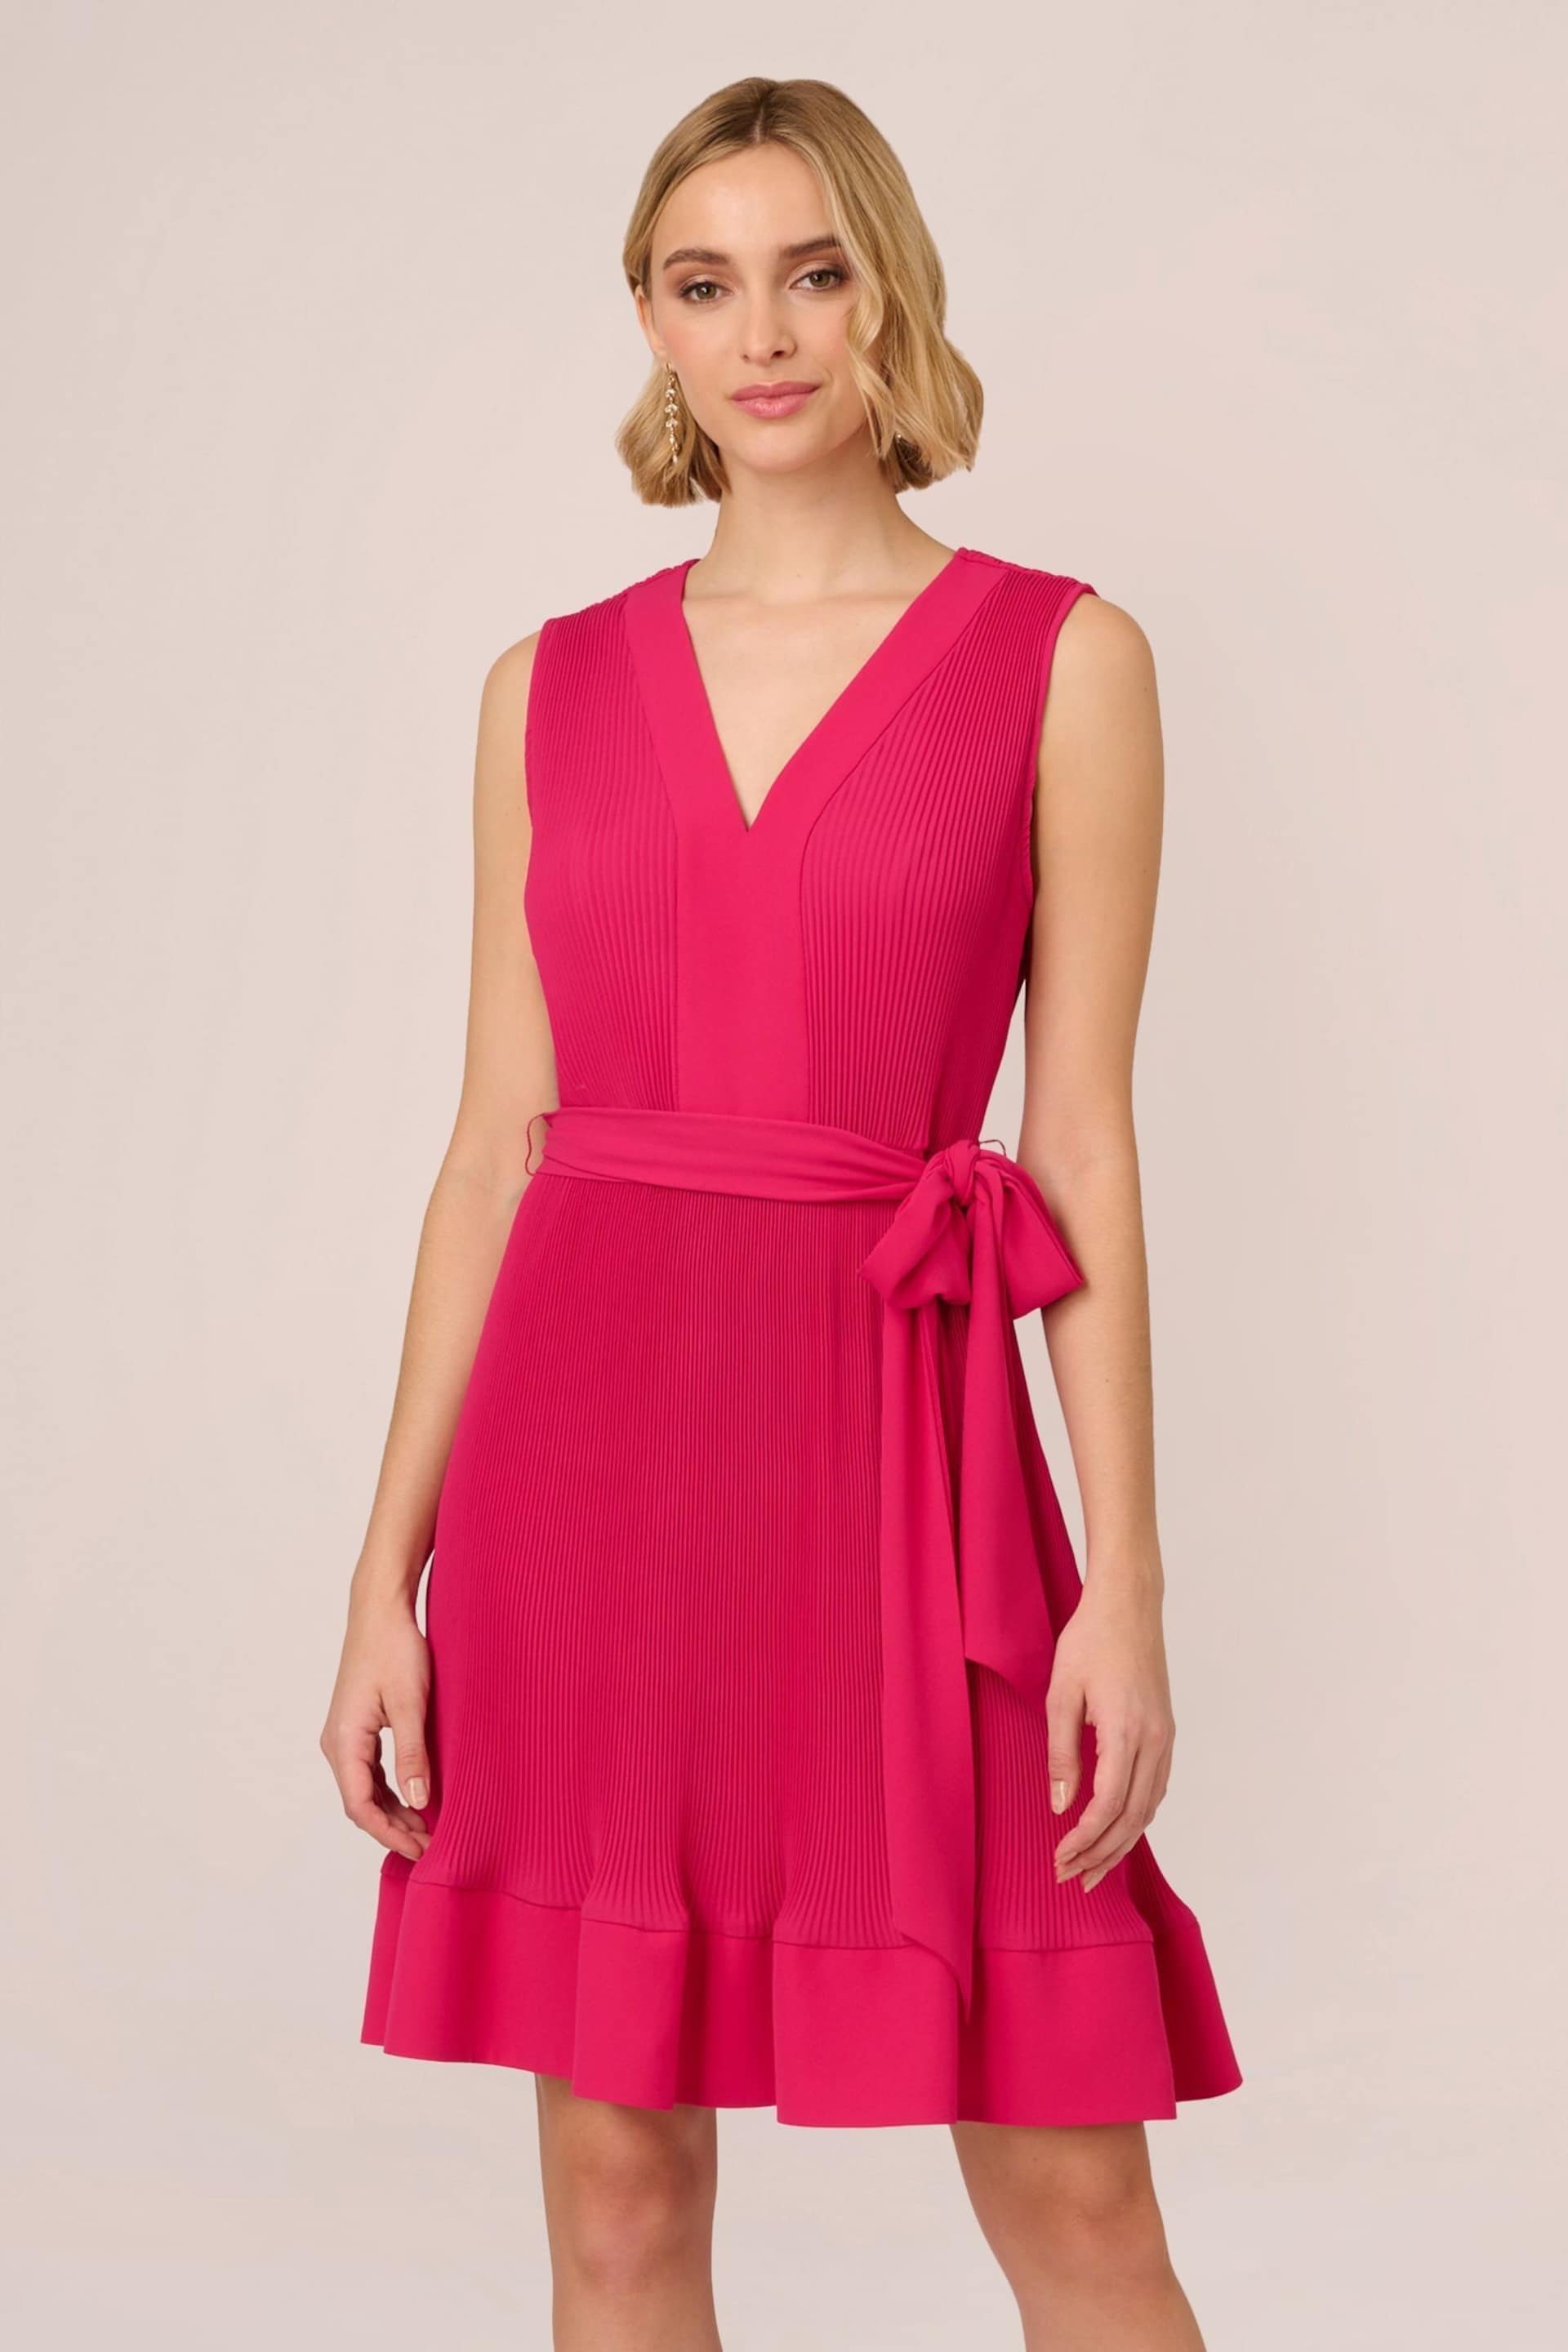 Adrianna Papell Pink Pleated Short Dress - Image 1 of 7